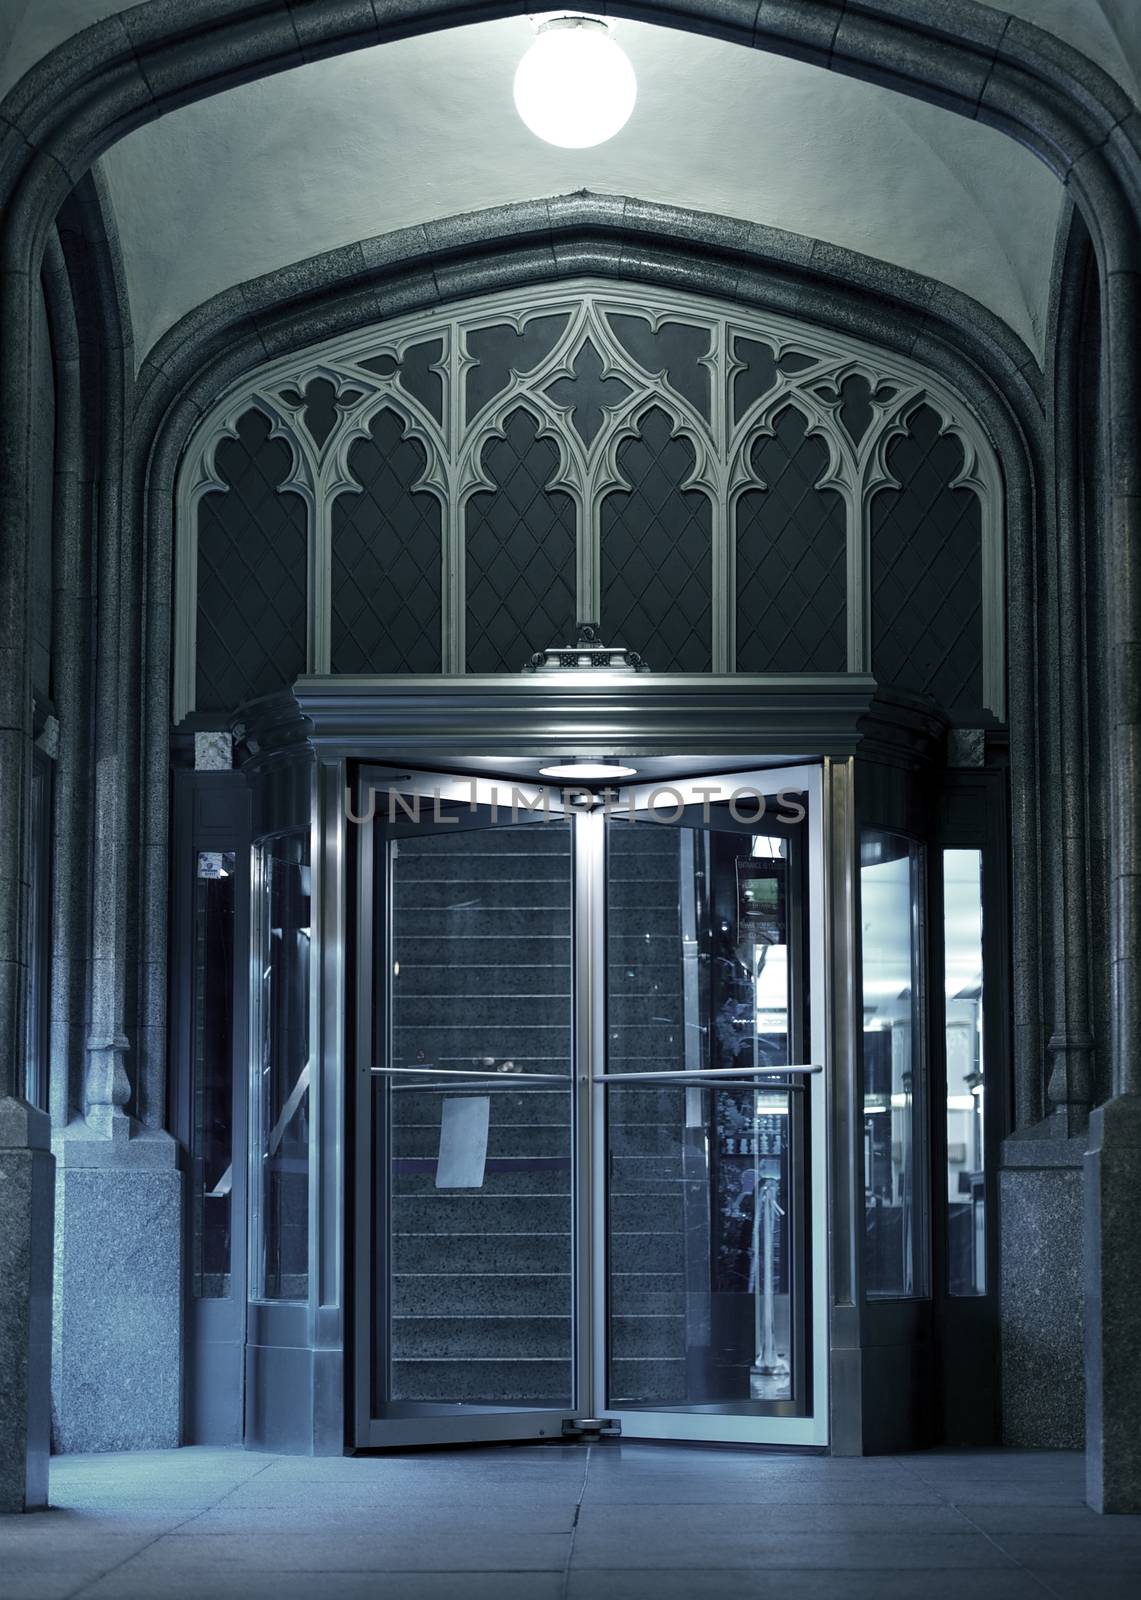 The Entrance - Chicago Architecture. Entrance with Glass Rotating Door. The Entrance - Vertical Photography.